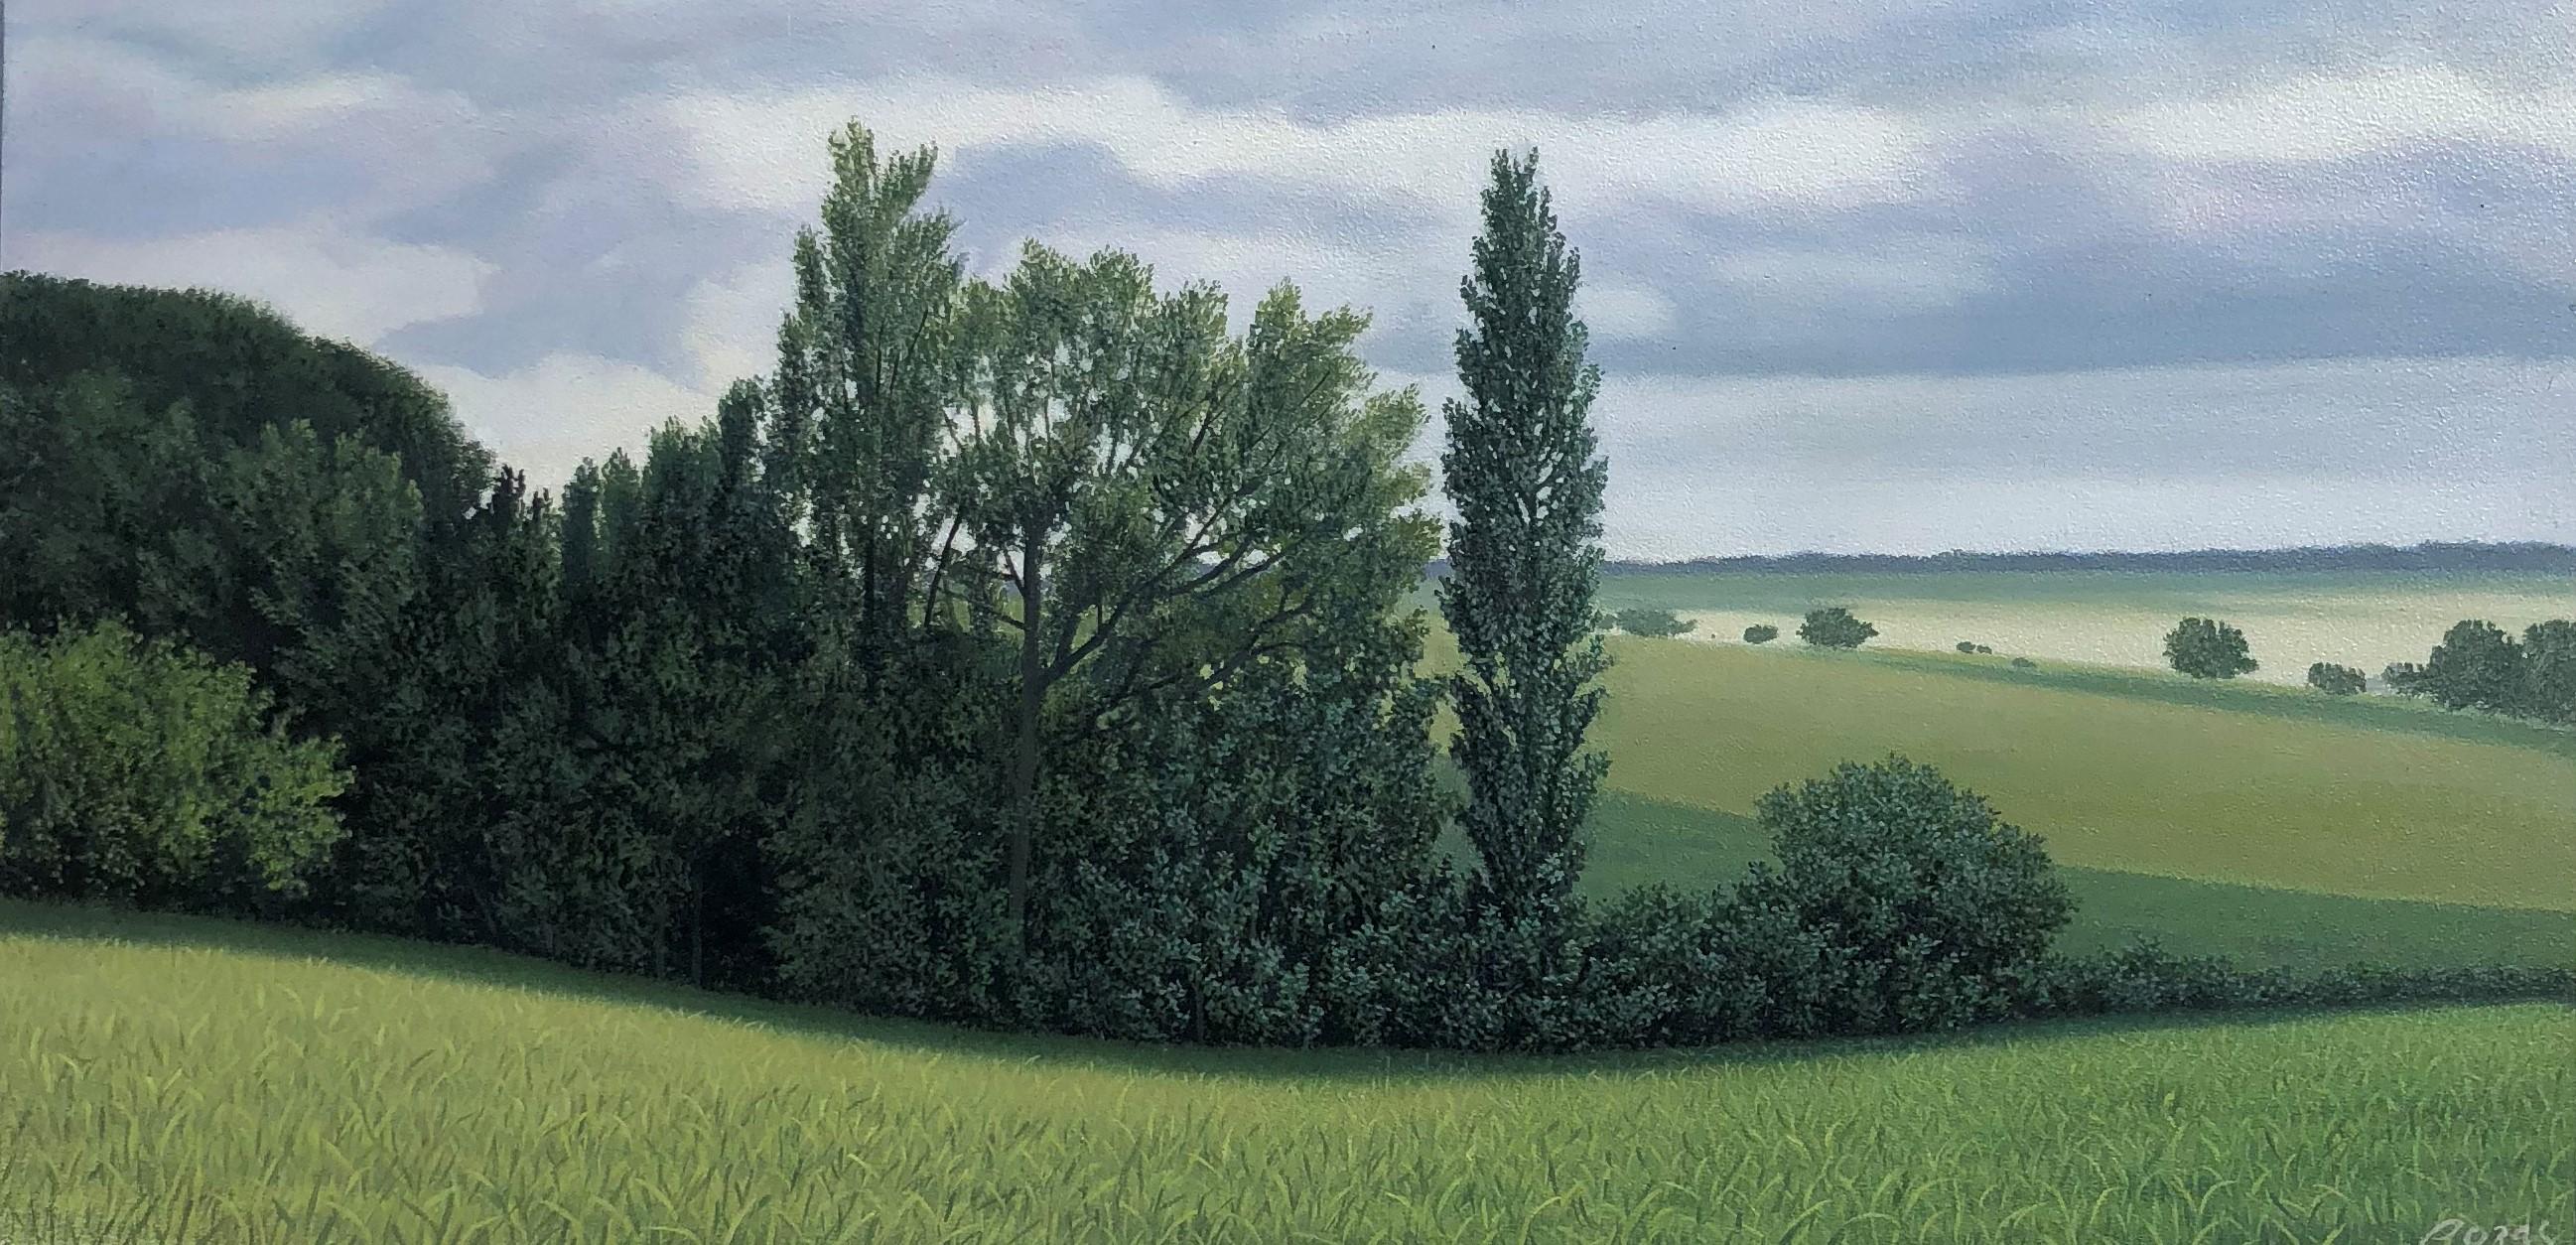 René Monzón Relova “Pozas” Landscape Painting - Lajania - Small Scale Highly Detailed Painting of Green Rolling Hills and Trees